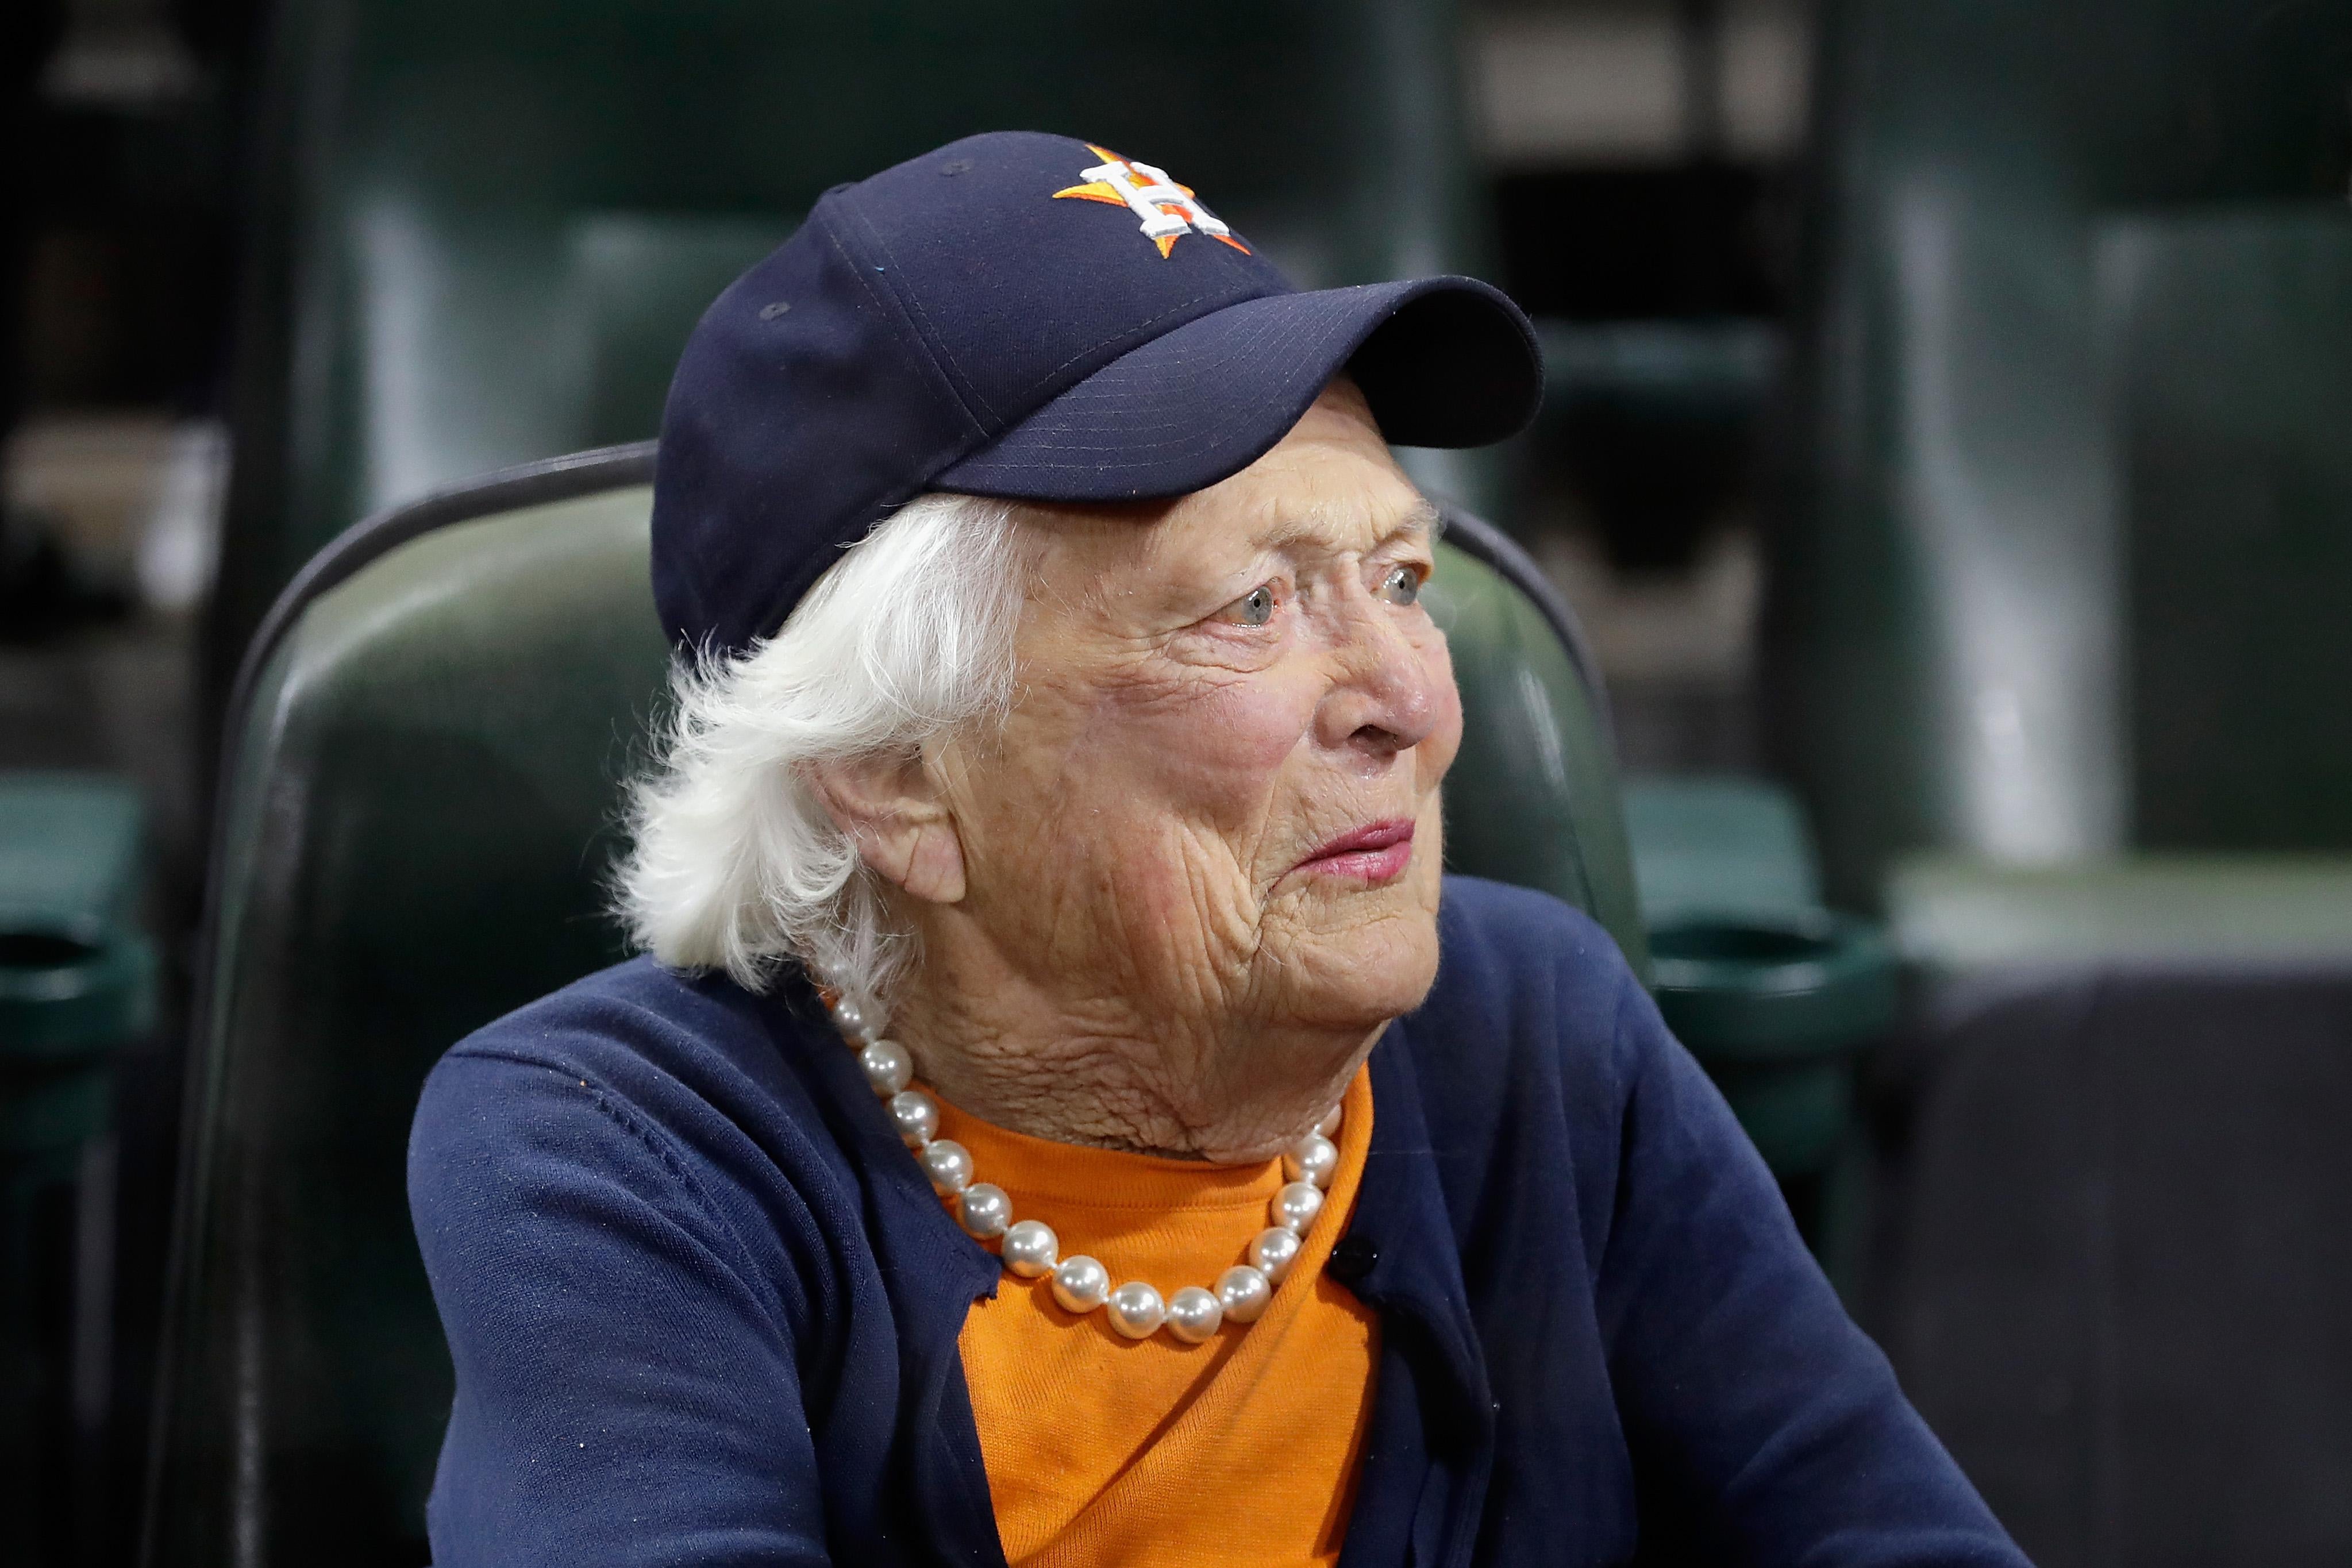 Barbara Bush, wearing a T-shirt, pearls, and a Houston Astros baseball cap, is seen sitting in stadium seating.